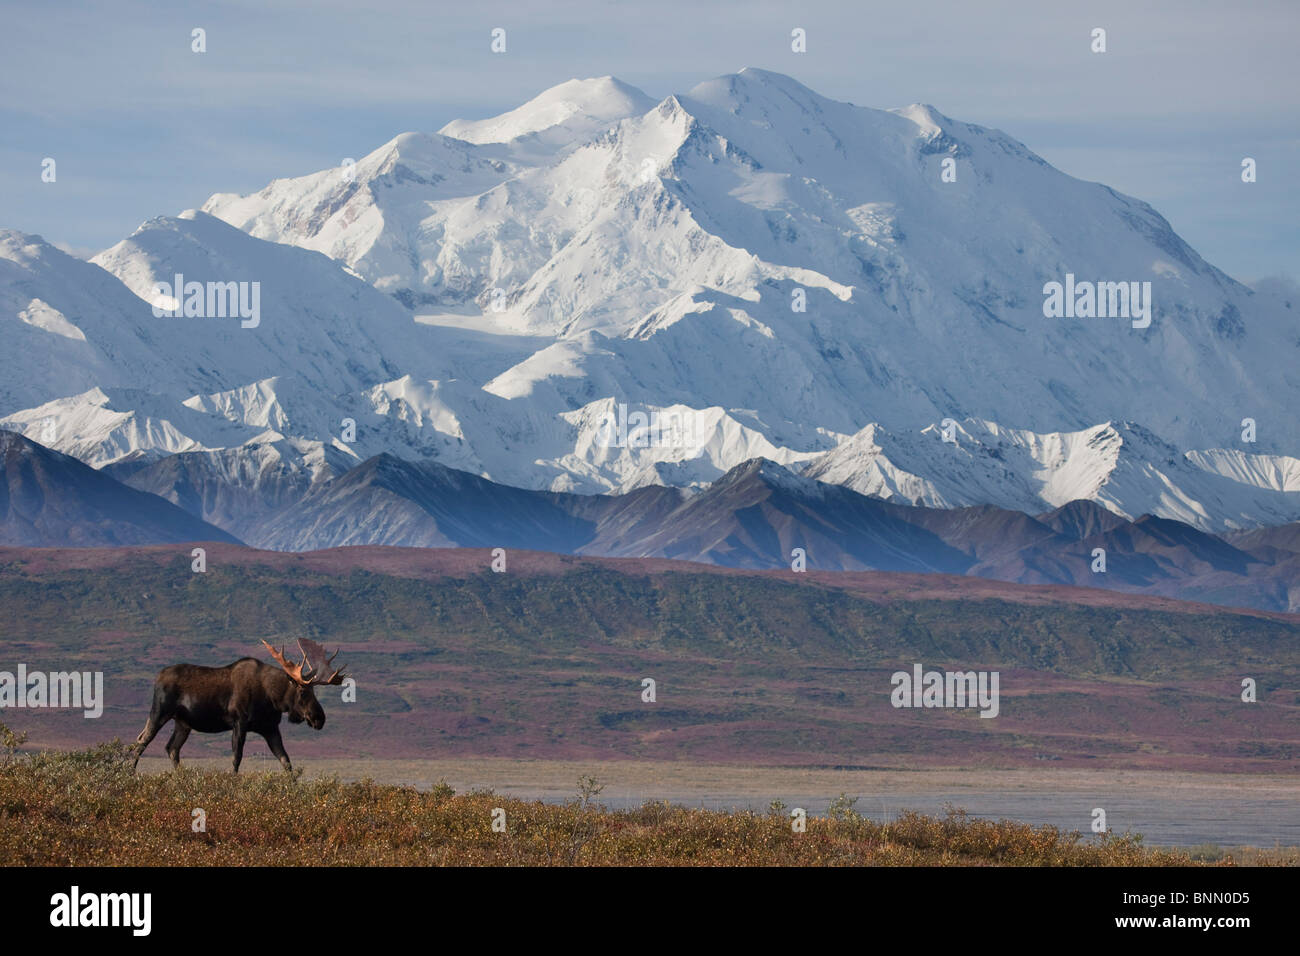 Bull moose standing on tundra in front of Mt. McKinley during Autumn, Denali National Park, Alaska Stock Photo